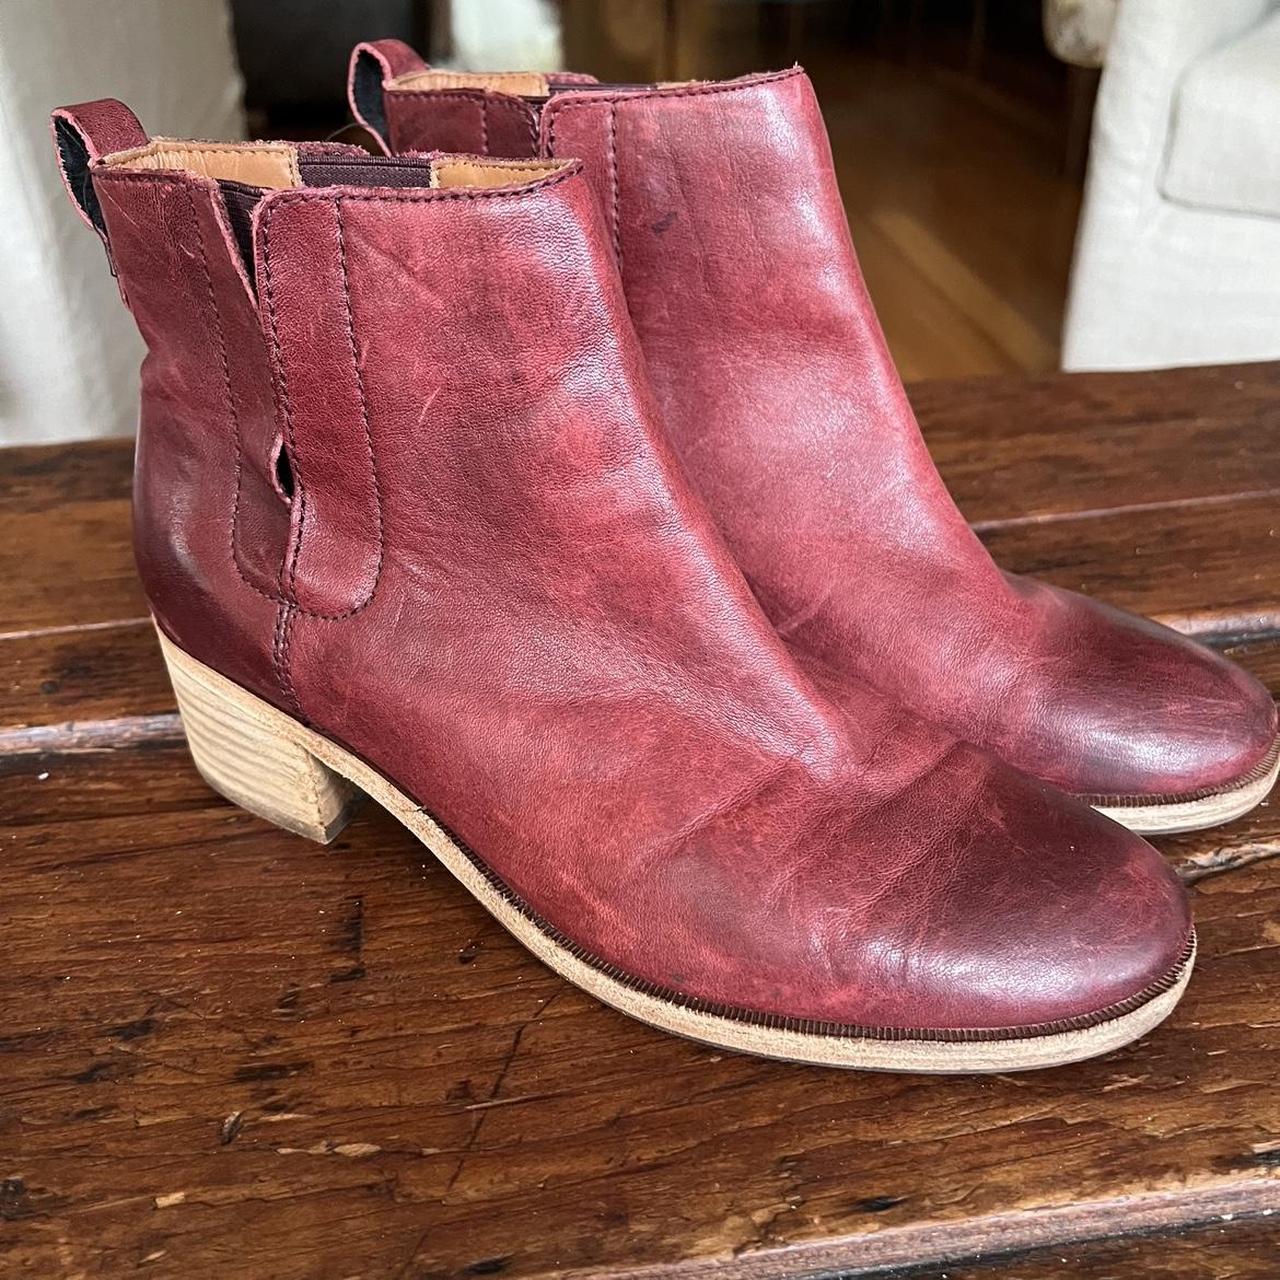 Korks Women's Burgundy and Brown Boots (8)